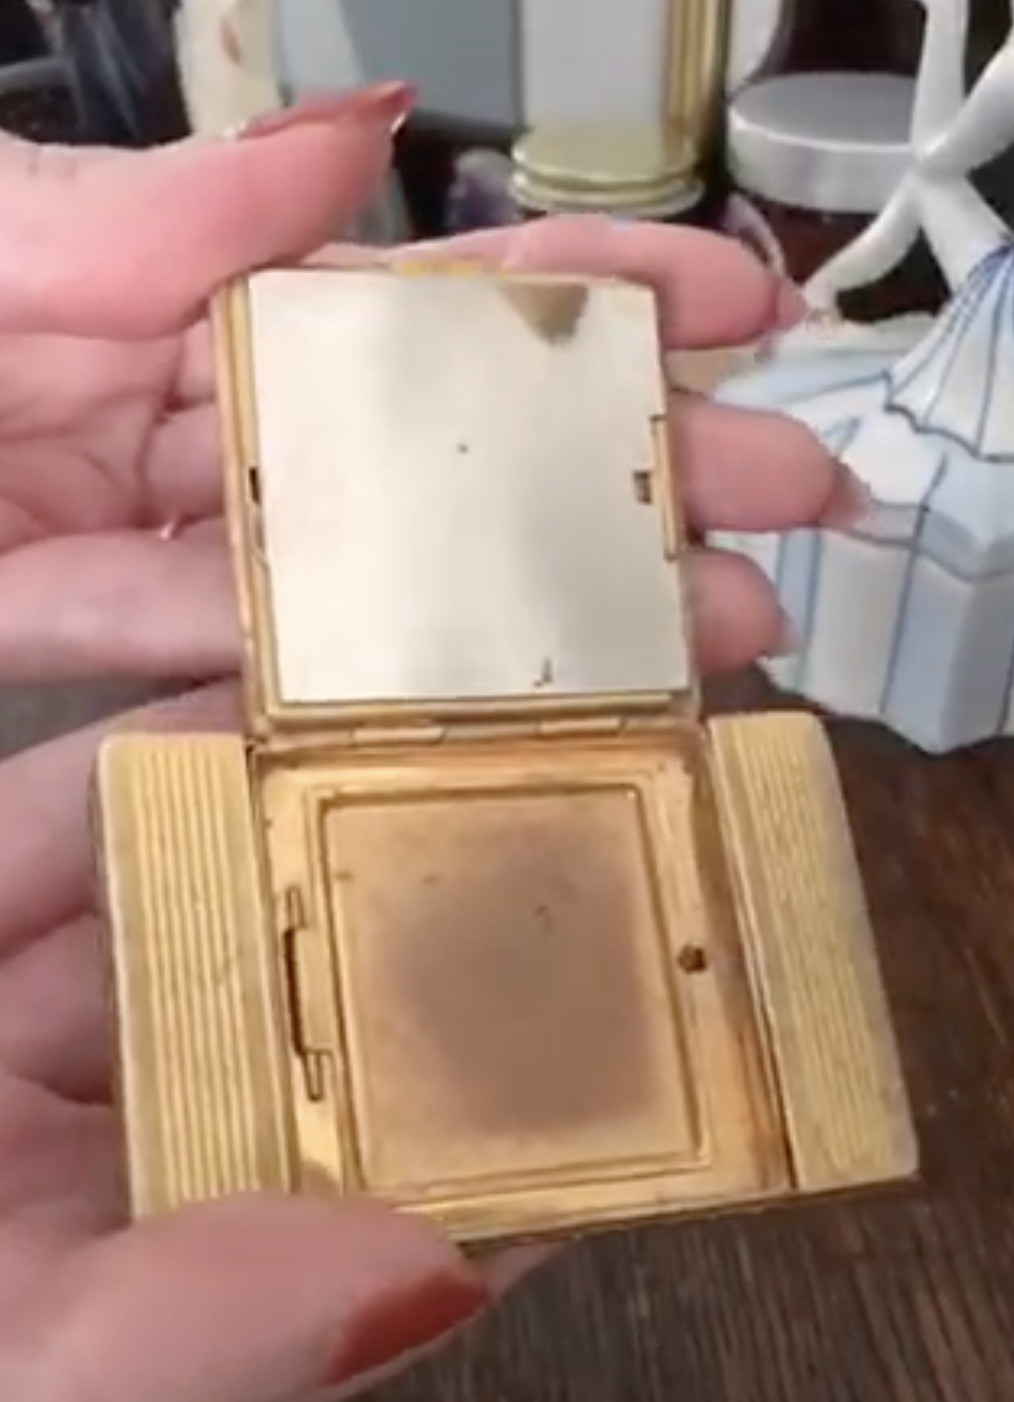 TikTok: These Eco-Friendly Vintage Makeup Compacts To Make A Comeback